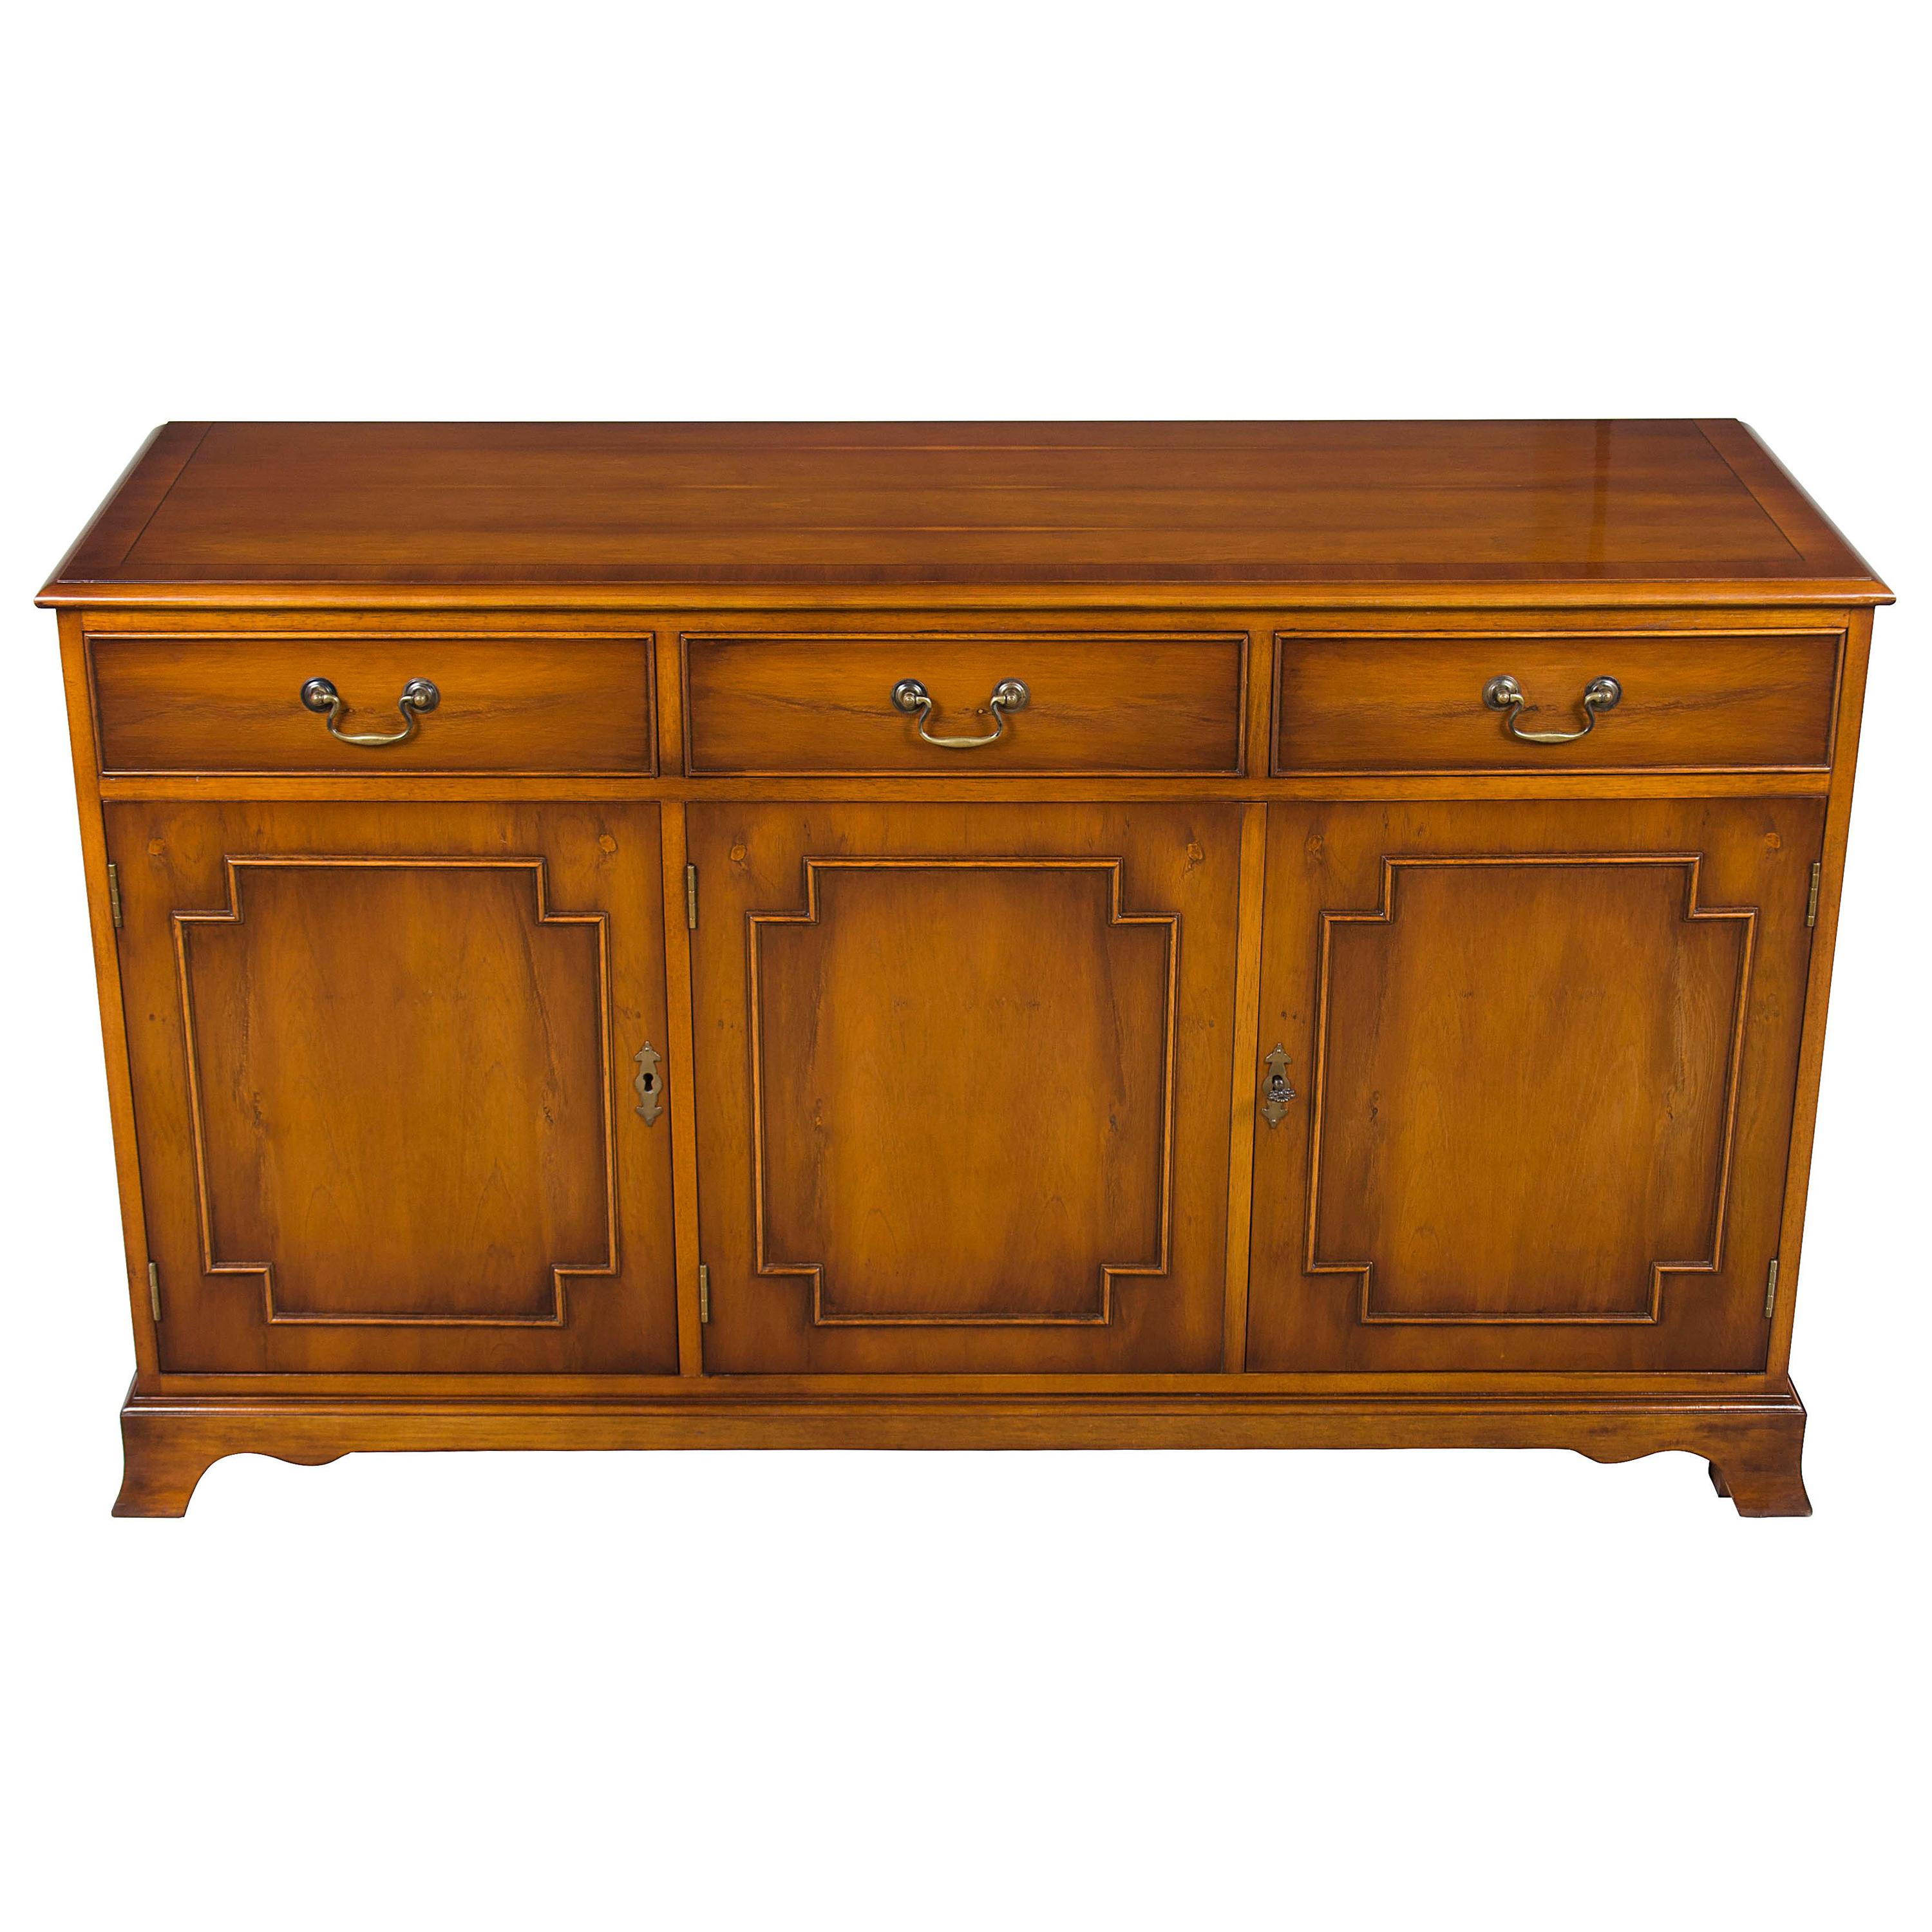 Vintage Yew Wood Narrow Console Cabinet Buffet Sideboard Credenza For Sale